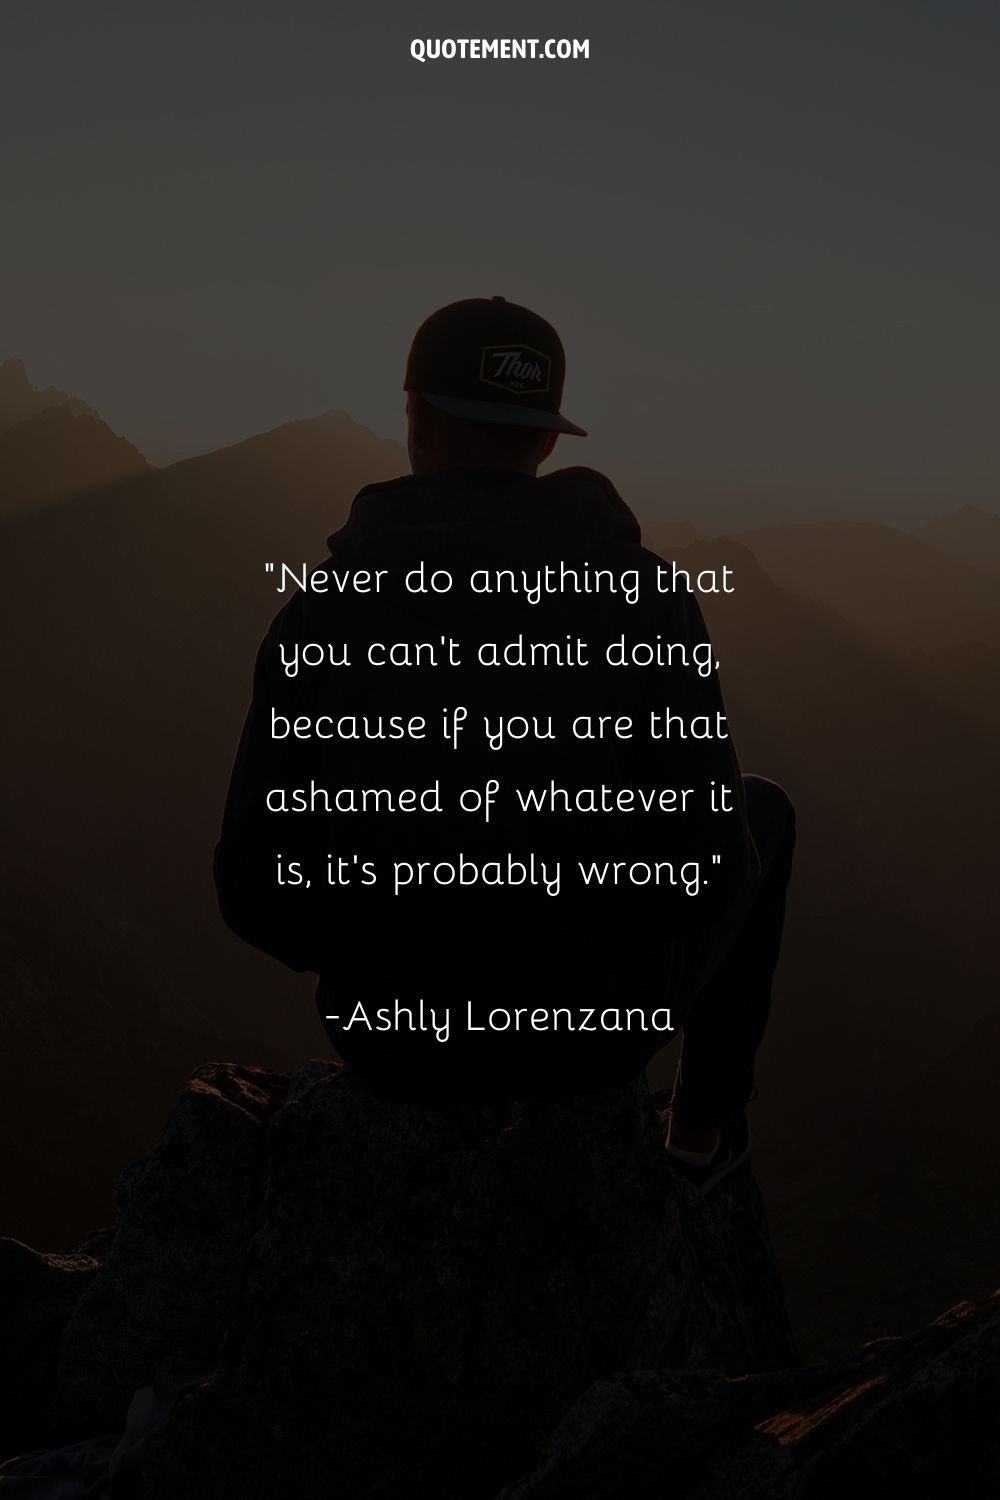 Never do anything that you can't admit doing, because if you are that ashamed of whatever it is, it's probably wrong